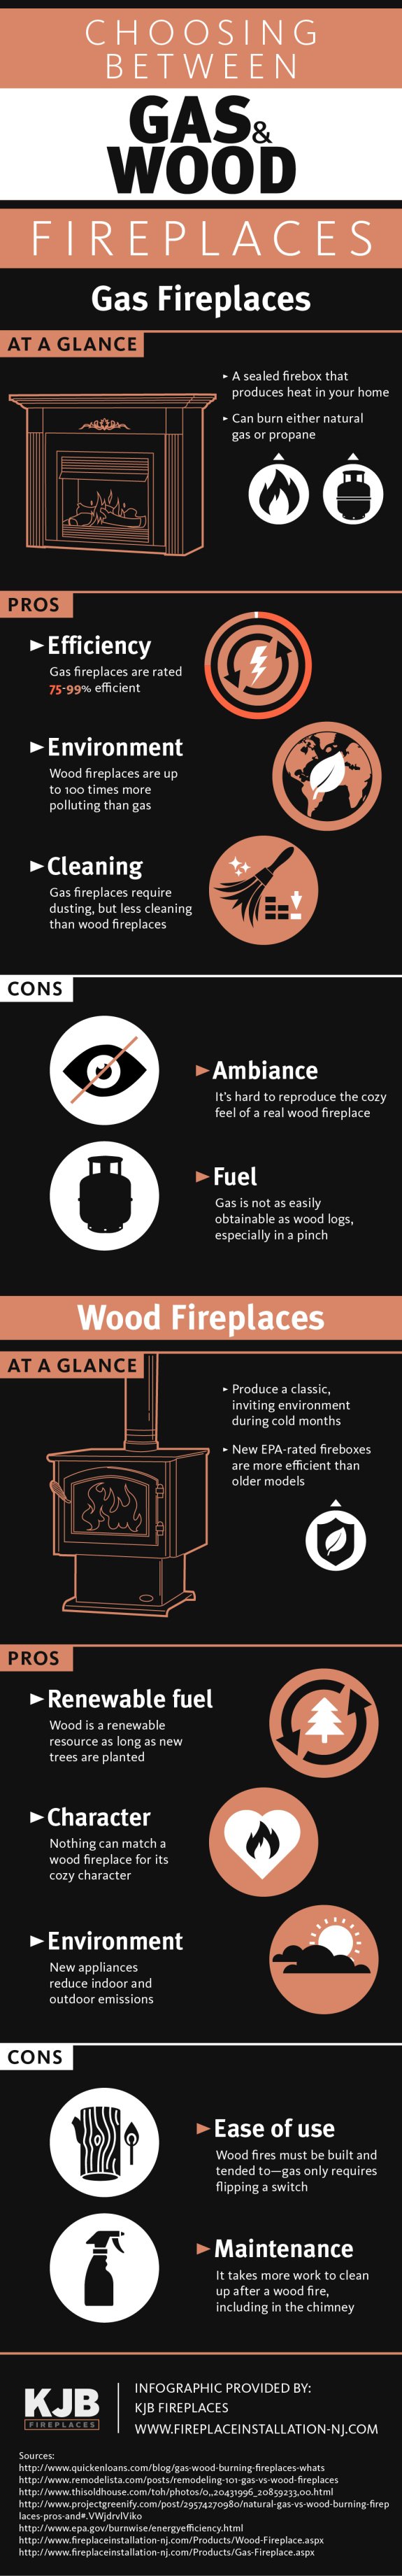 Choosing Gas Wood Fireplaces Infographic